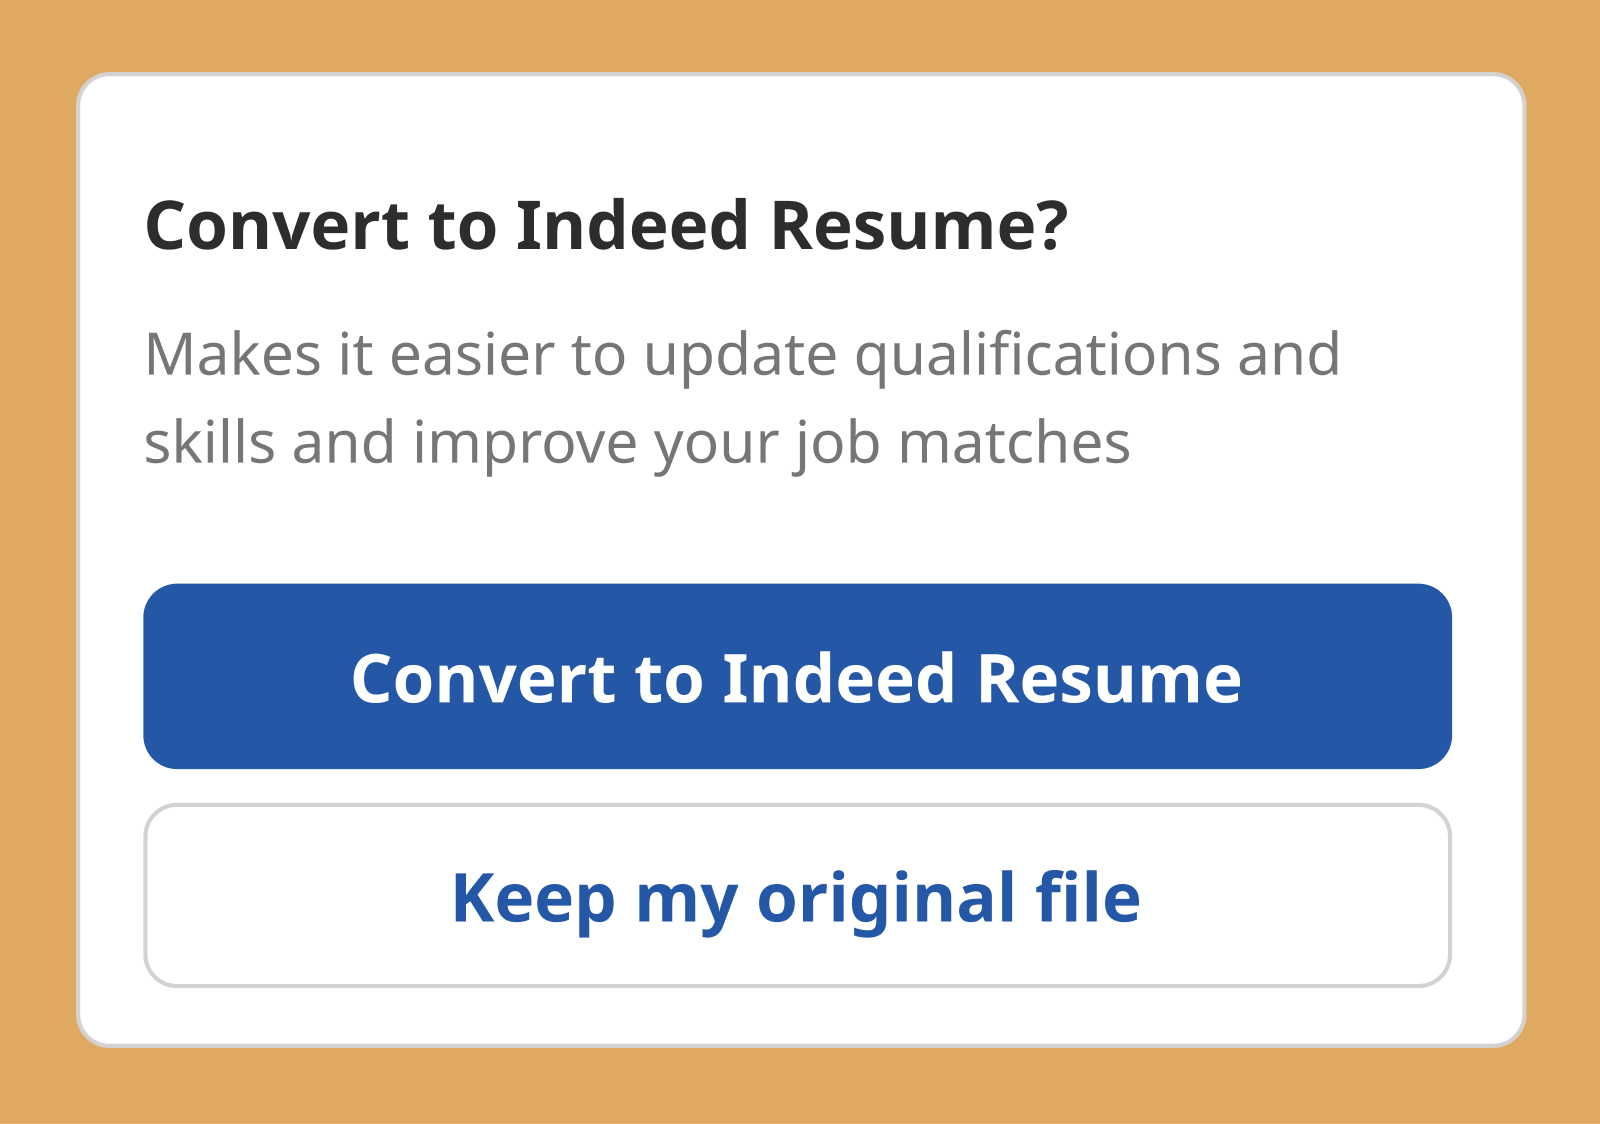 These are the buttons you use to convert your resume to an Indeed Resume or keep your original file.